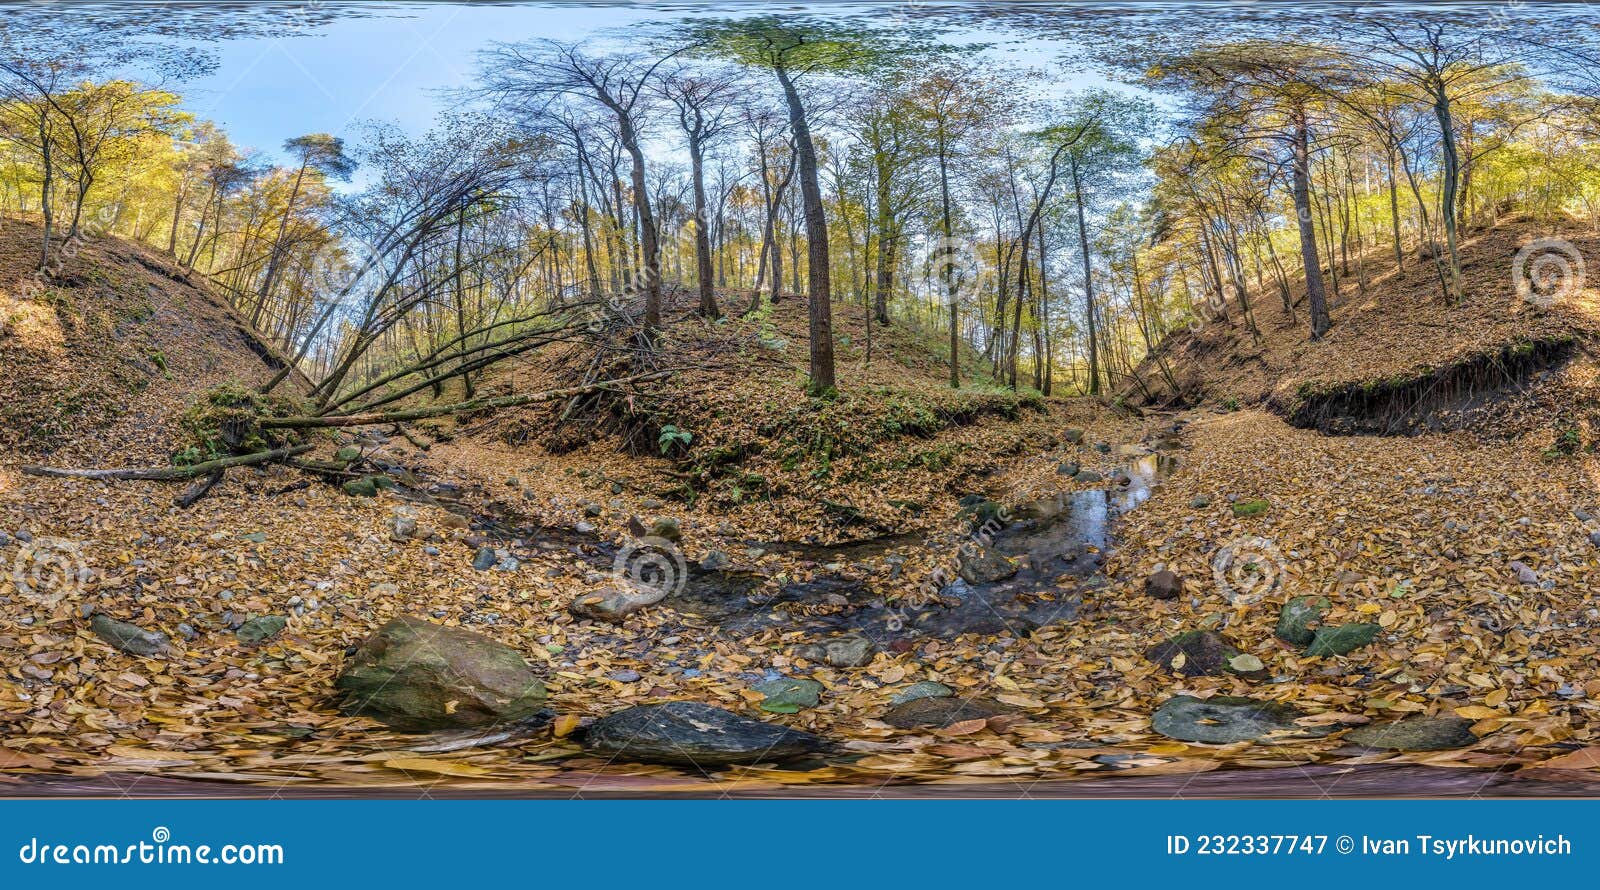 full seamless hdri 360 panorama high in mountains near stream in tree-covered ravine in autumn forest equirectangular spherical